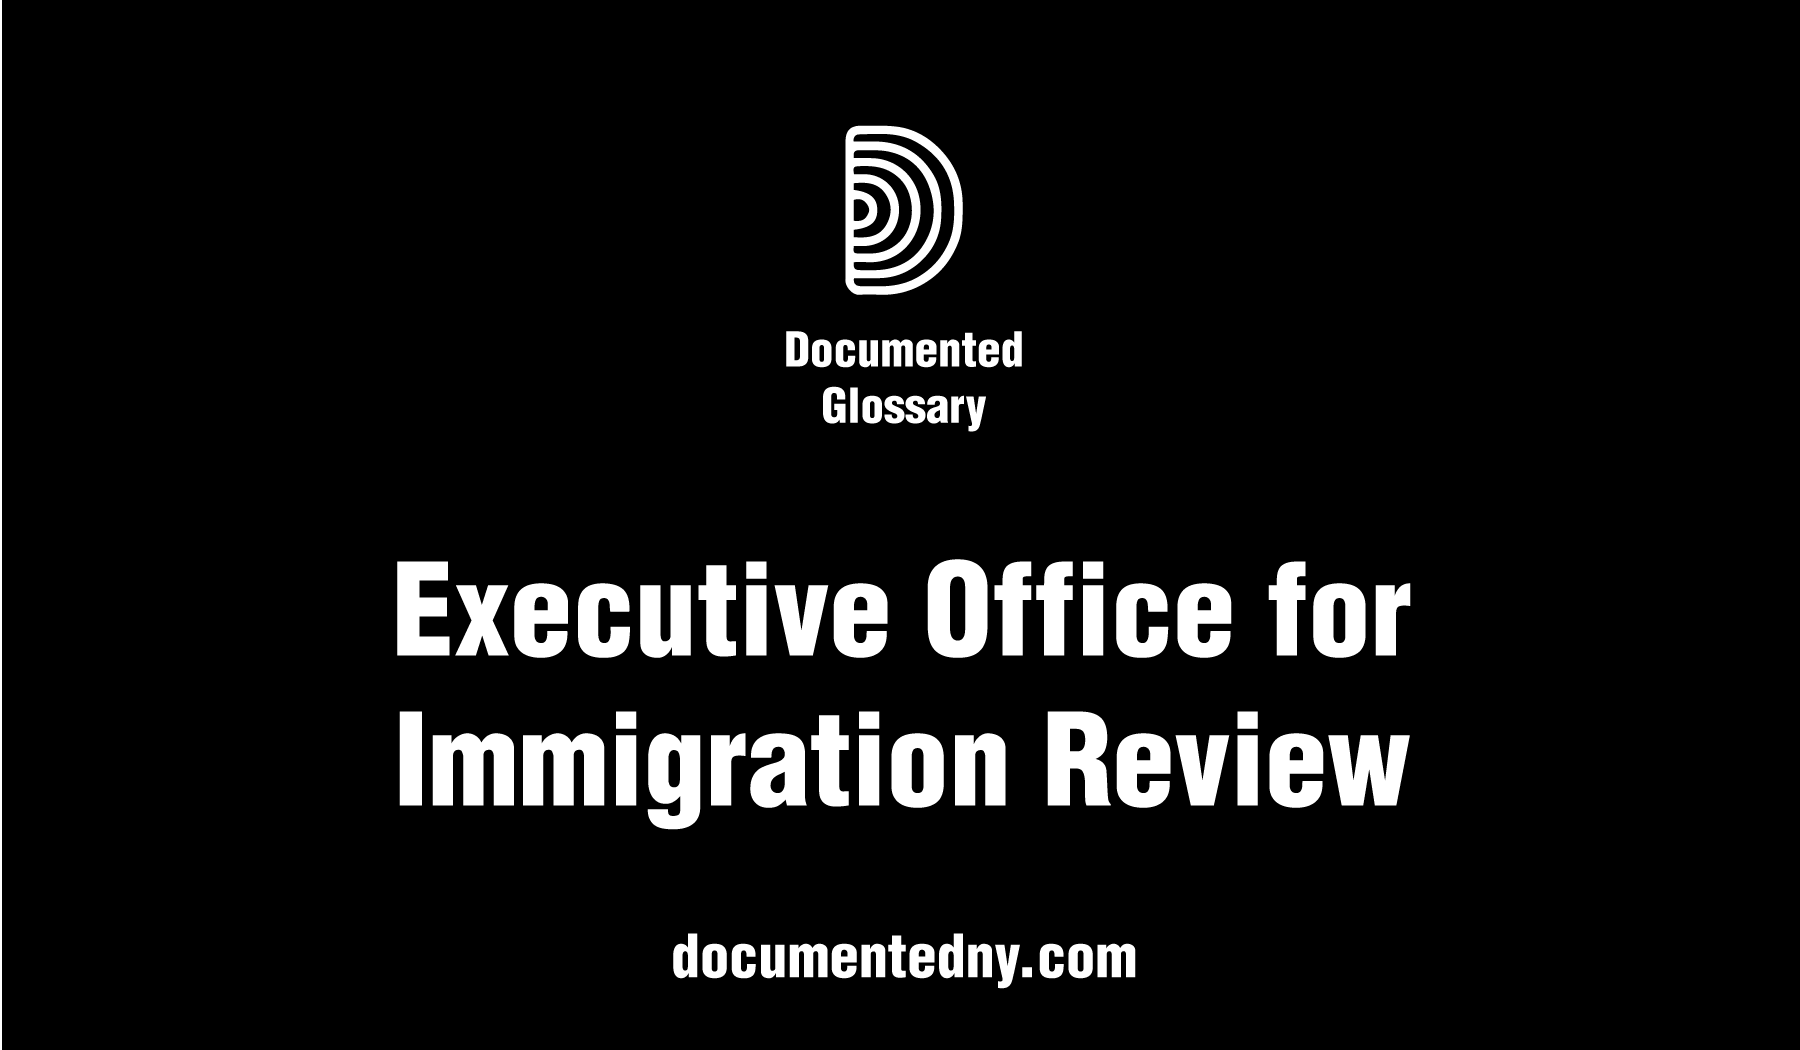 How the Executive Office for Immigration Review Oversees Immigration